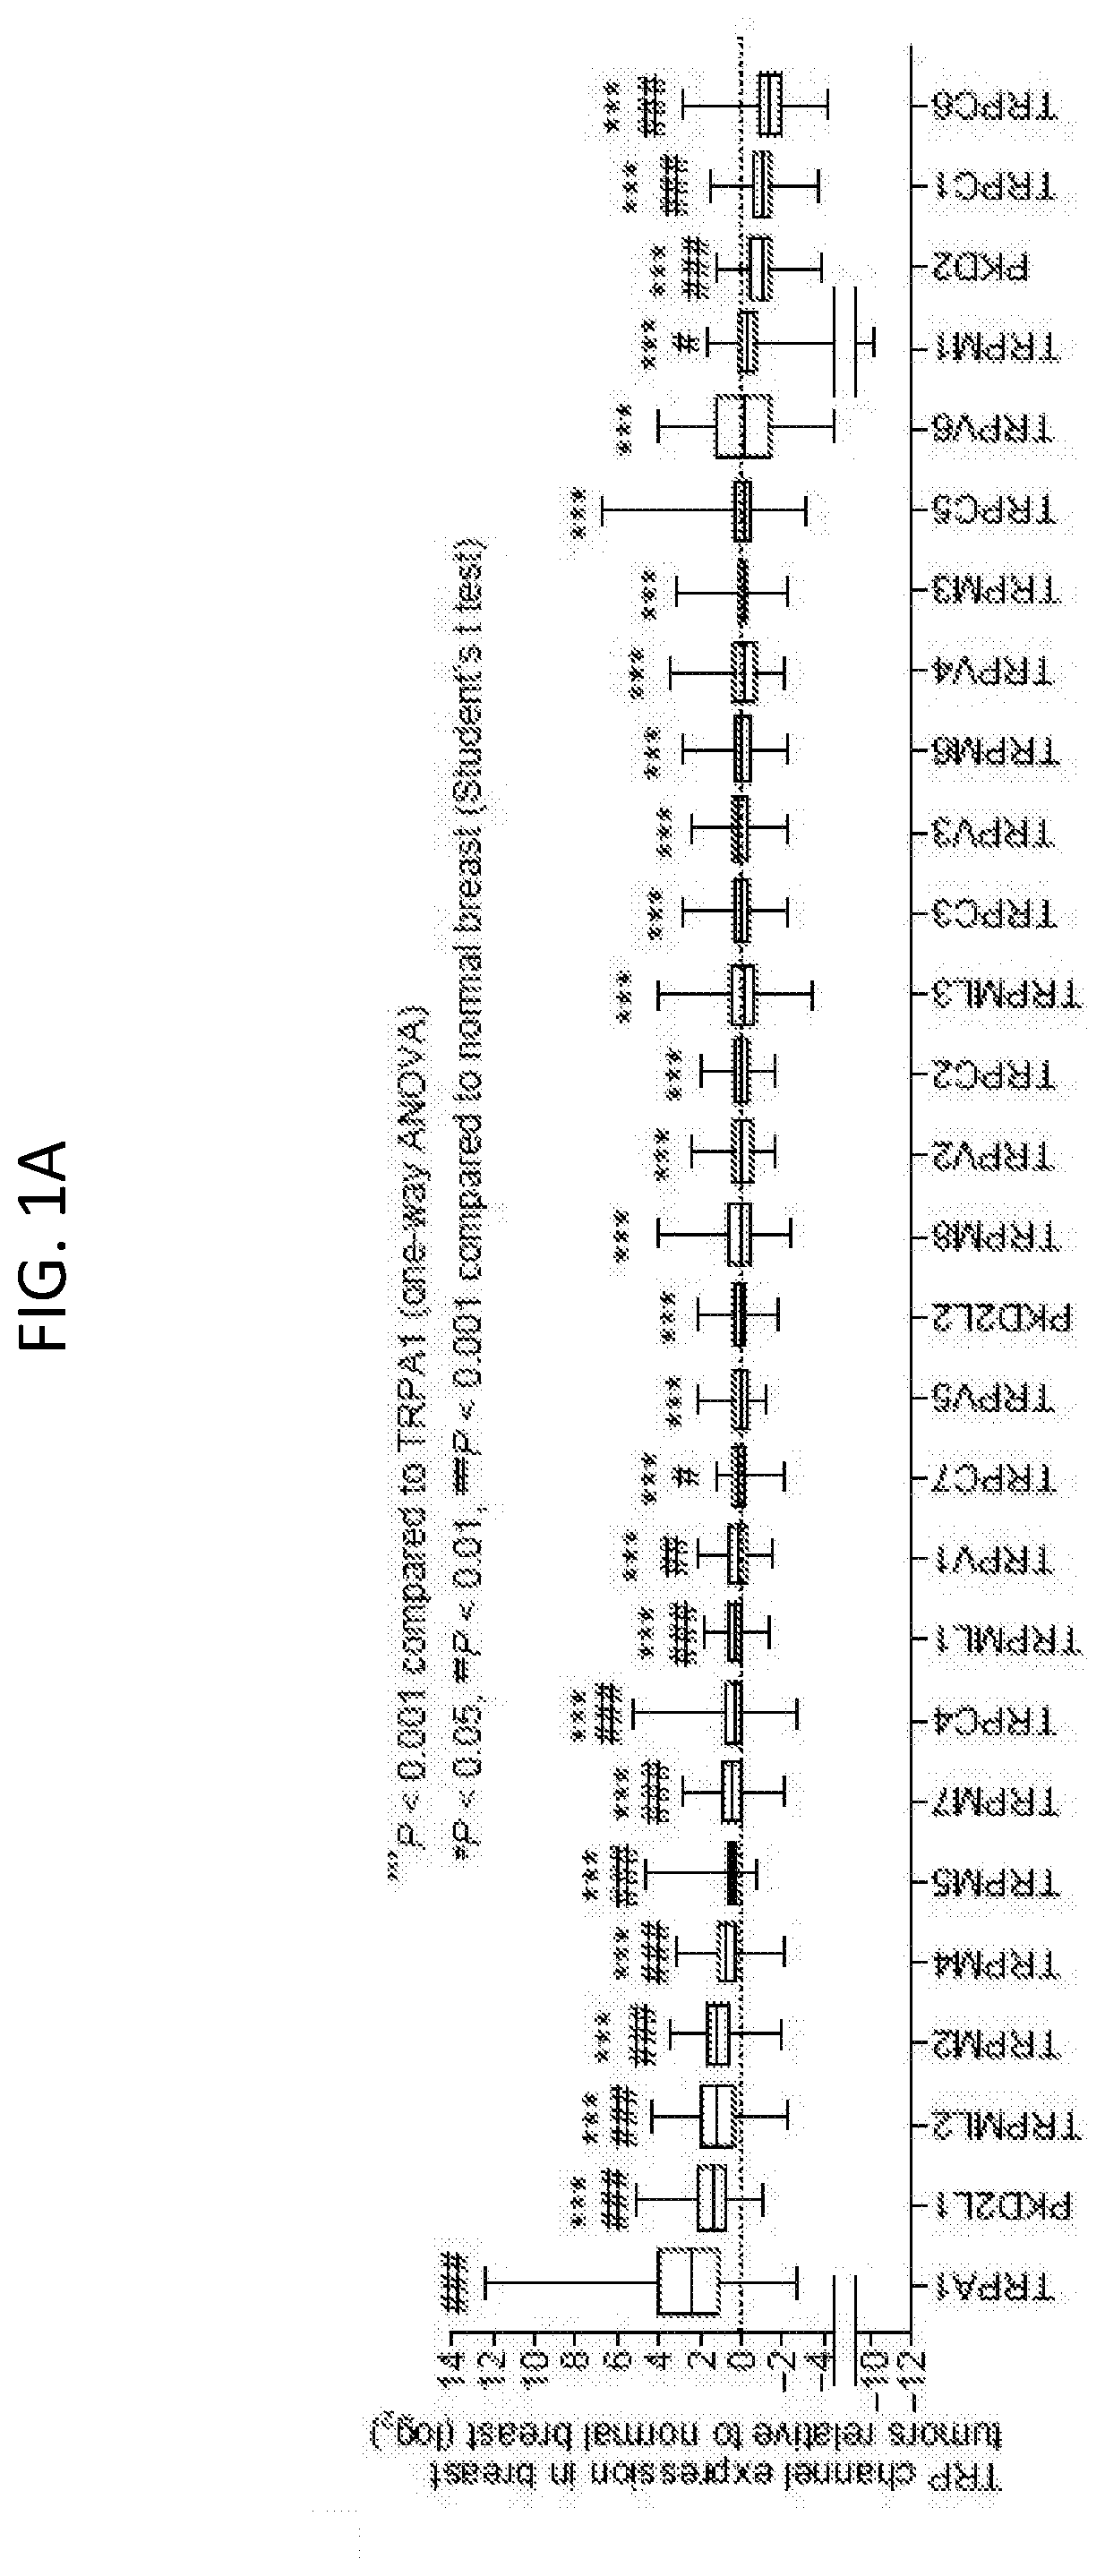 Methods of use for trp channel antagonist-based combination cancer therapies